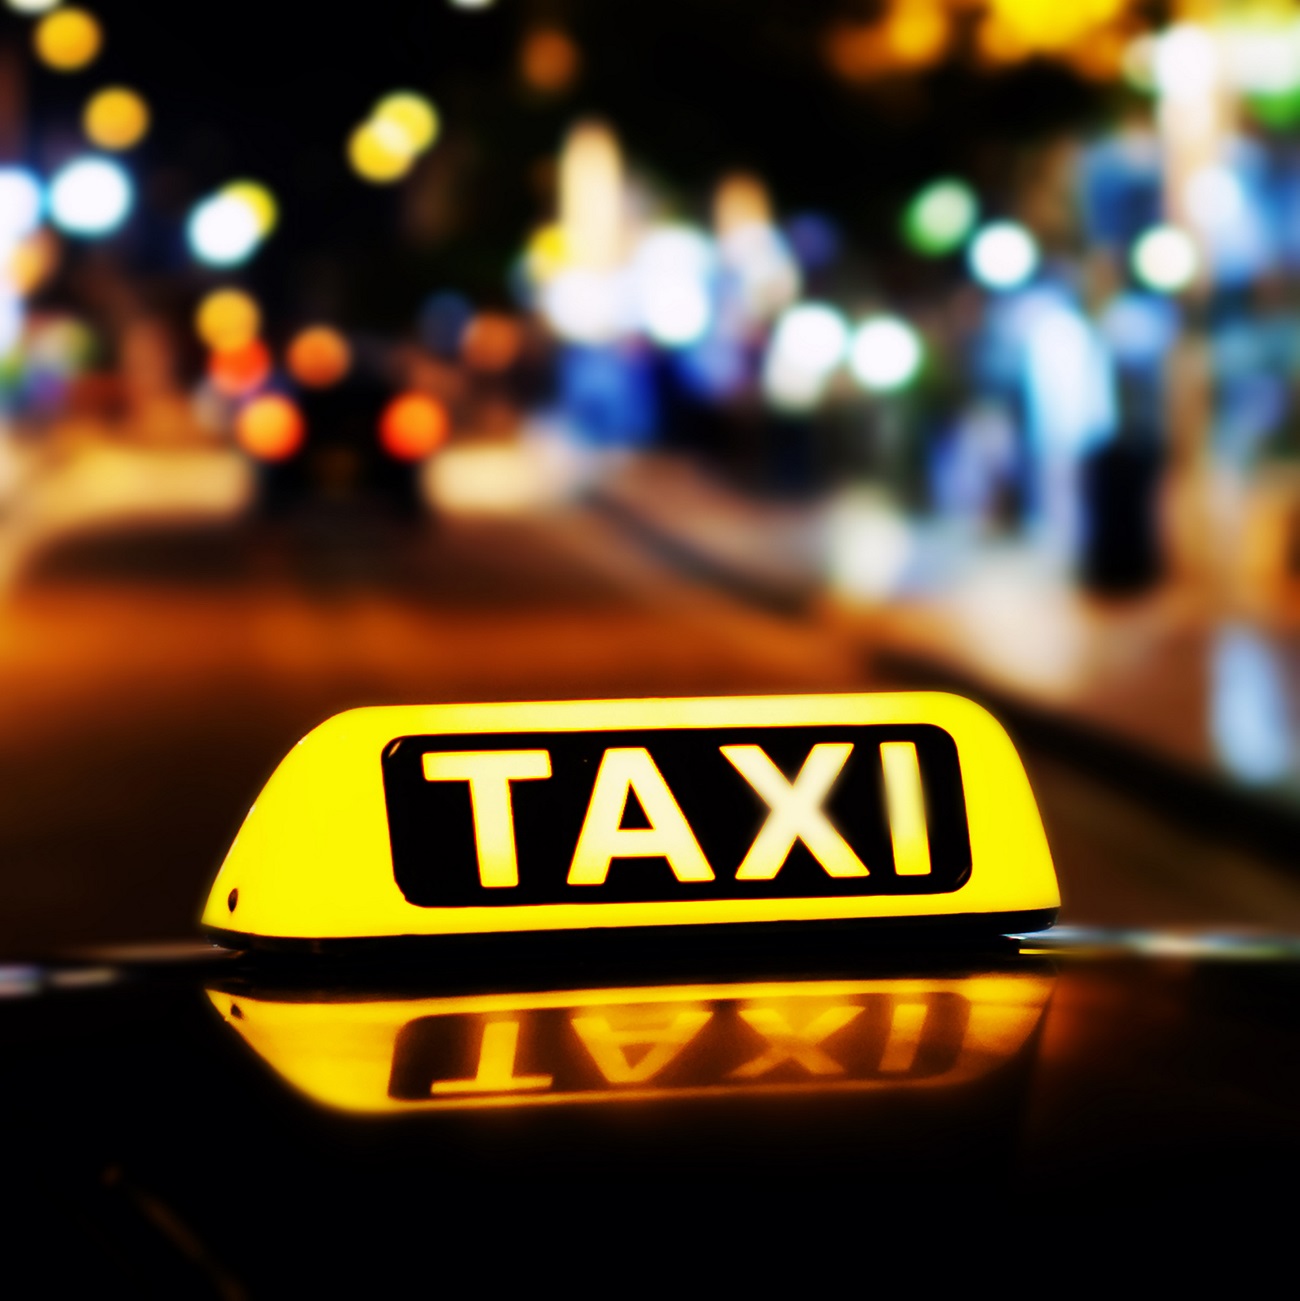 Taxi roof sign, lit up, in front of a blurry city street background